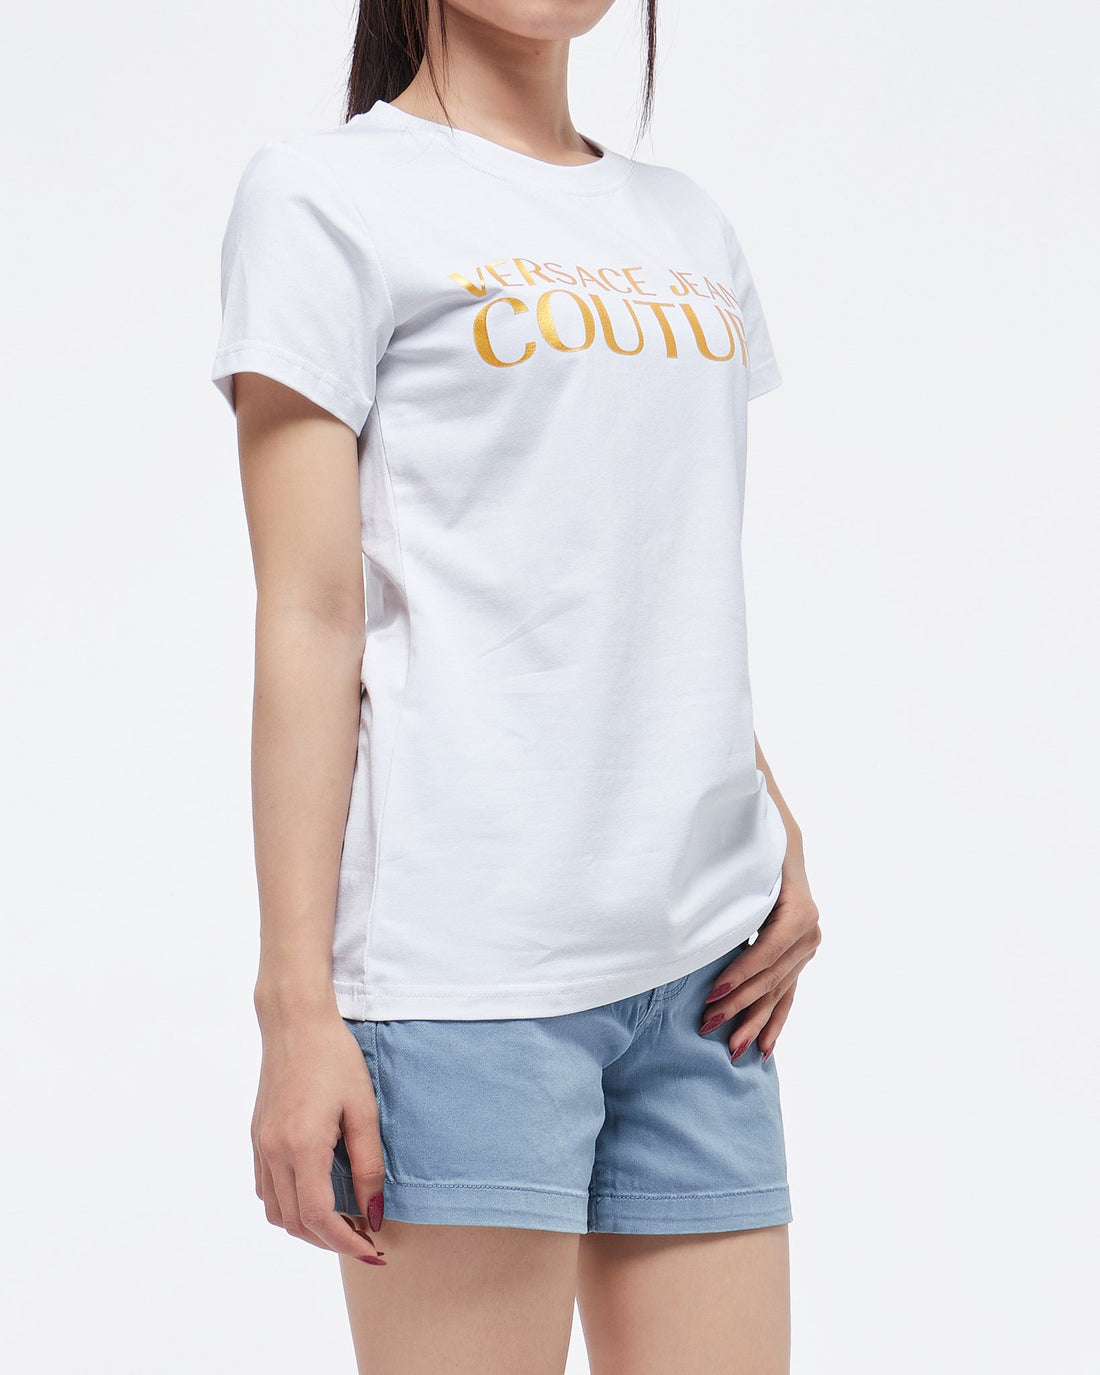 MOI OUTFIT-V Couture Gold Printed Lady T-Shirt 13.90